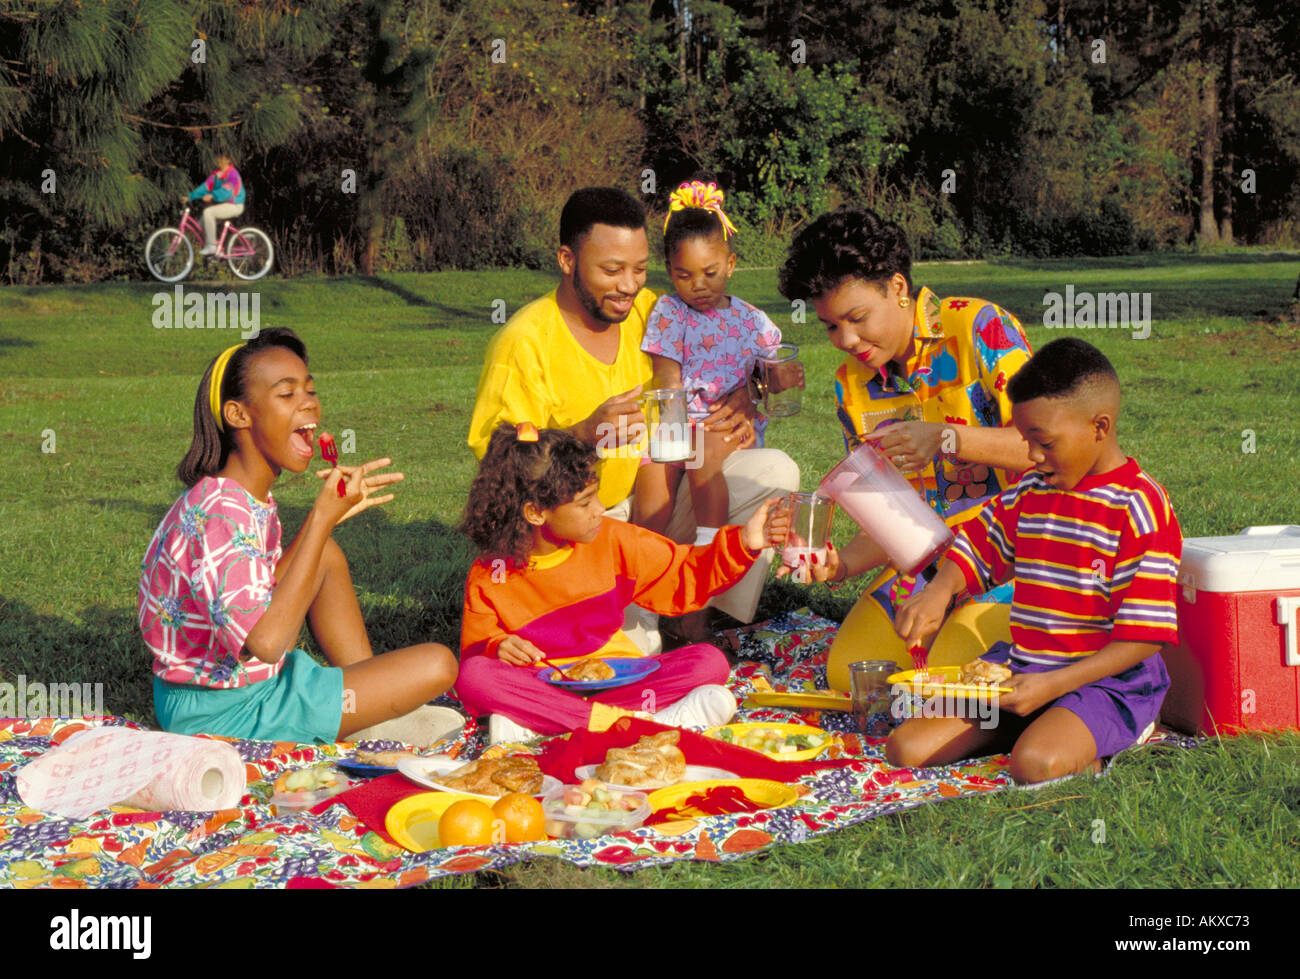 AFRICAN AMERICAN FAMILY HAVING A PICNIC IN THE PARK AFRICAN AMERICAN